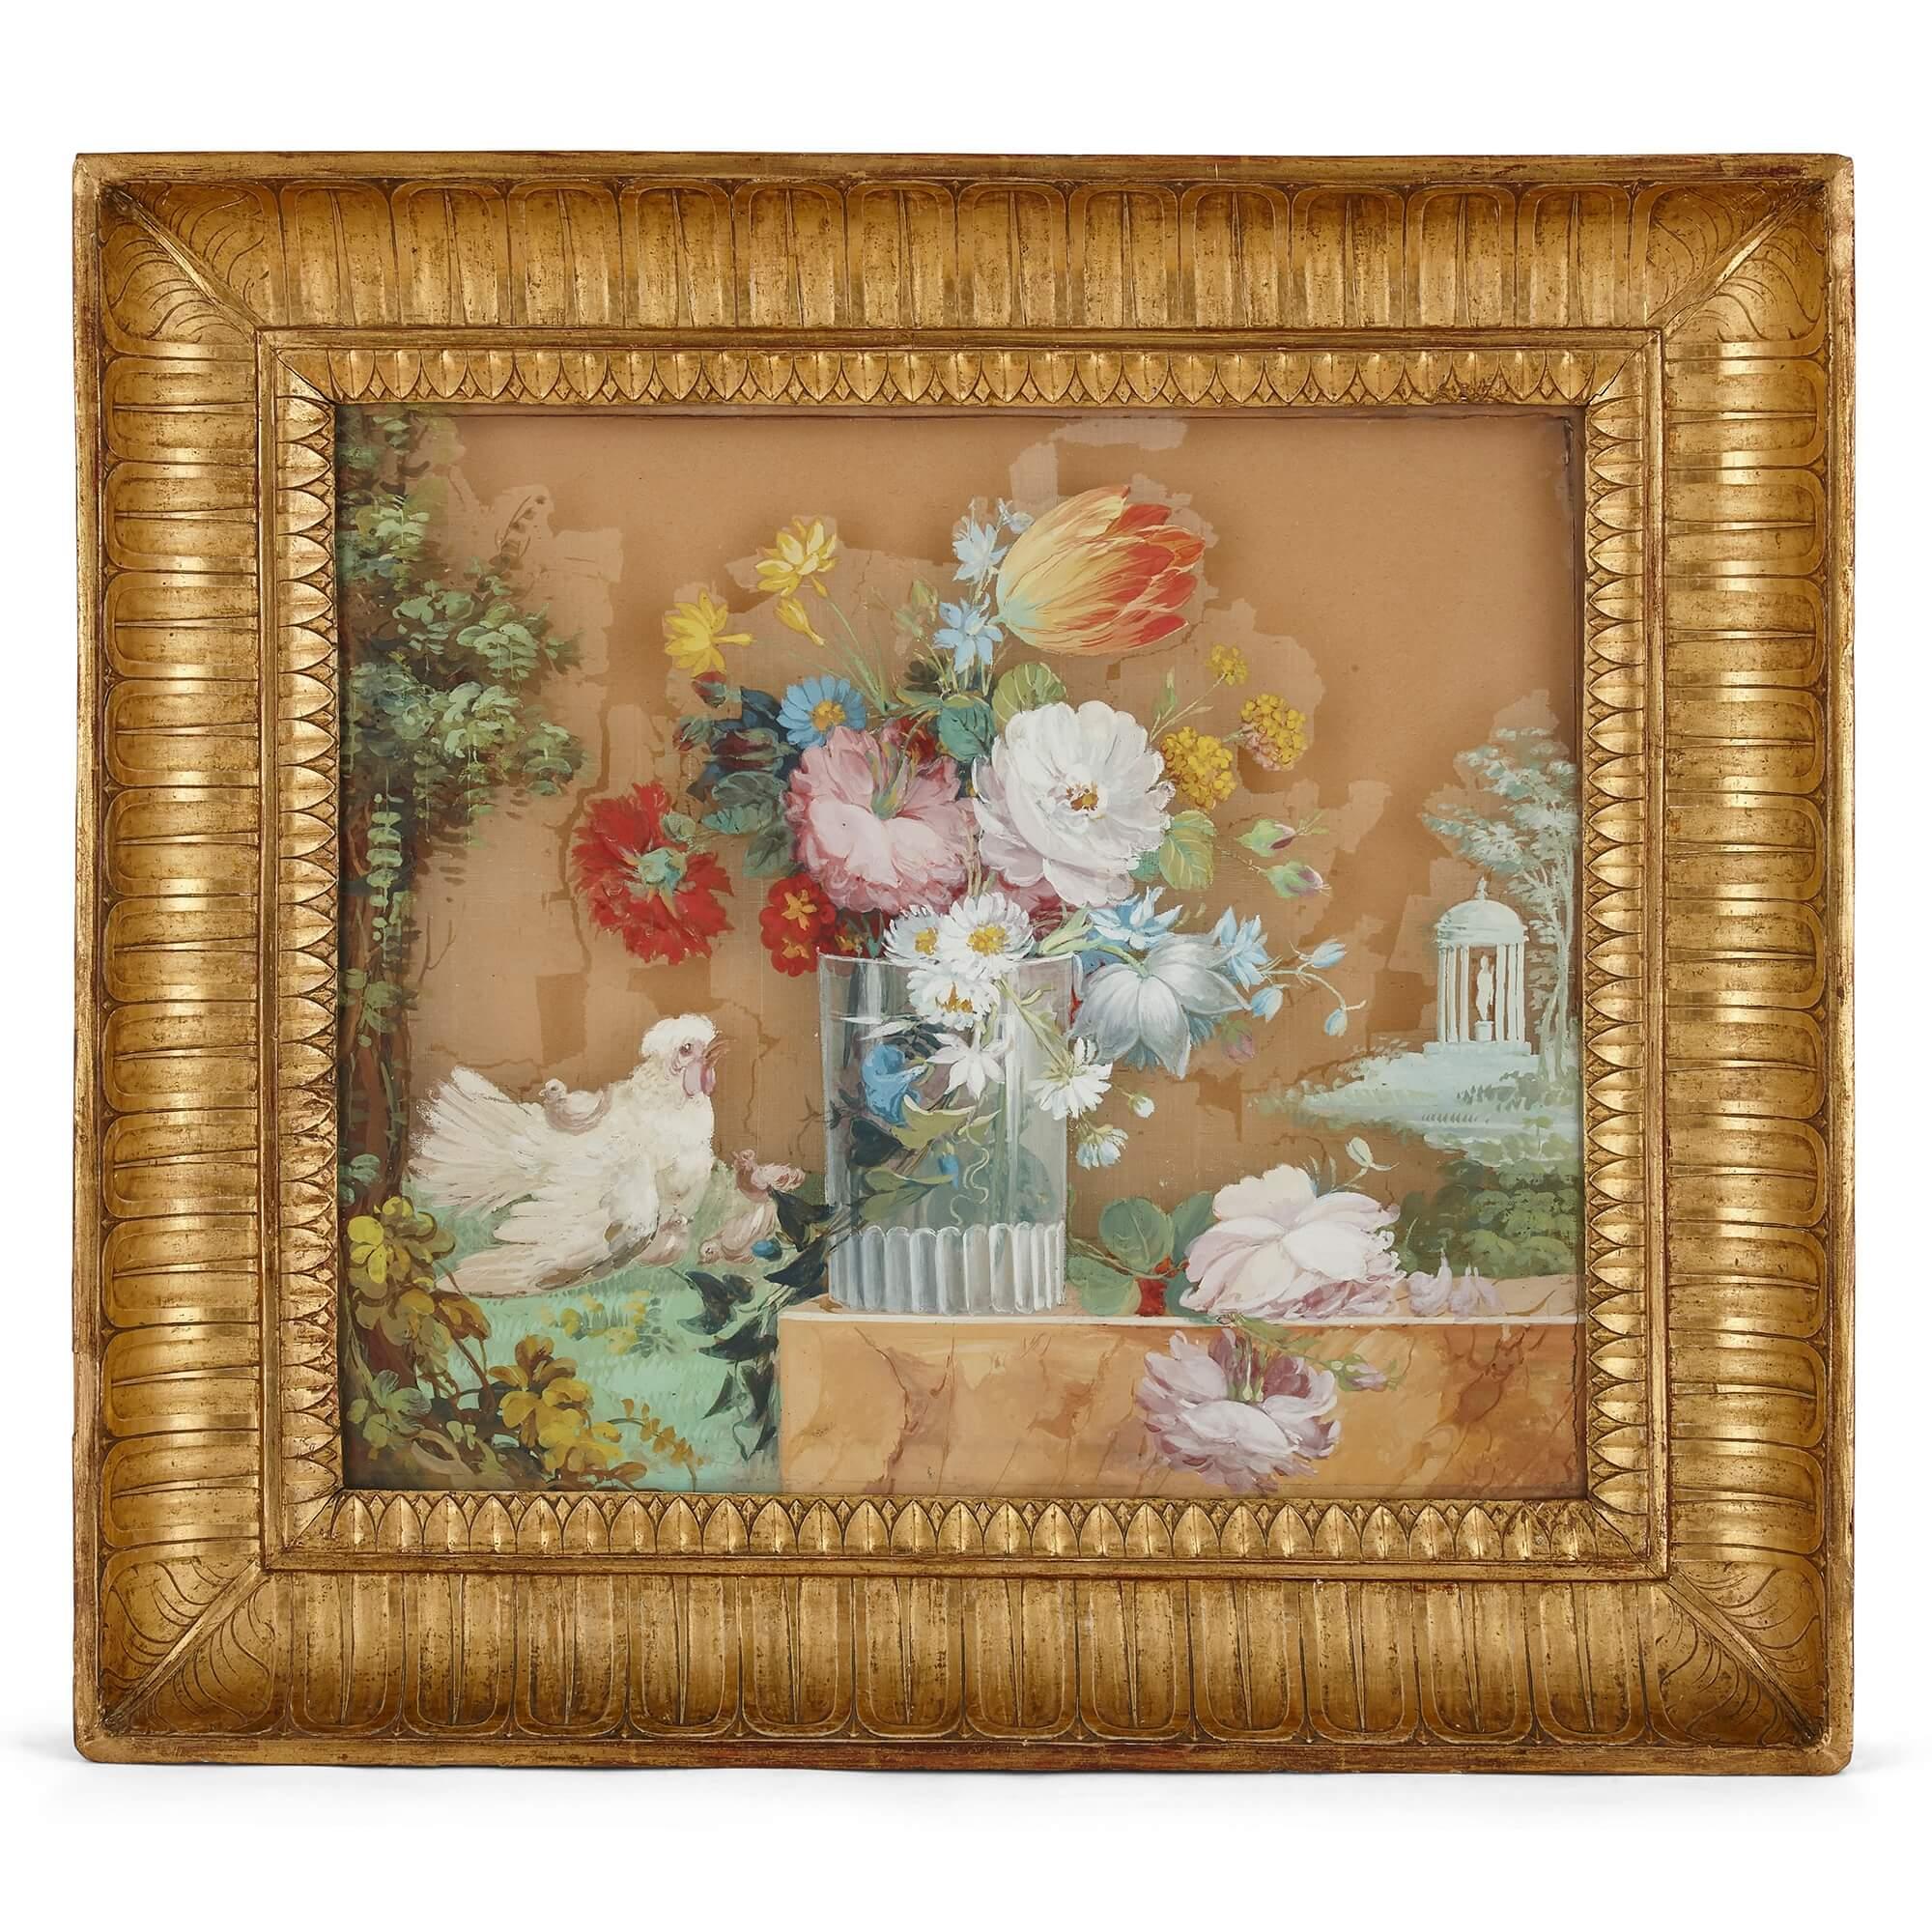 Reverse glass floral paintings in giltwood frames
Continental, 19th Century
Frame: Height 55.5cm, width 58.5cm, depth 7cm
Glass: Height 41cm, width 45.5cm

These antique paintings make excellent use of the beautiful reverse glass technique, whereby